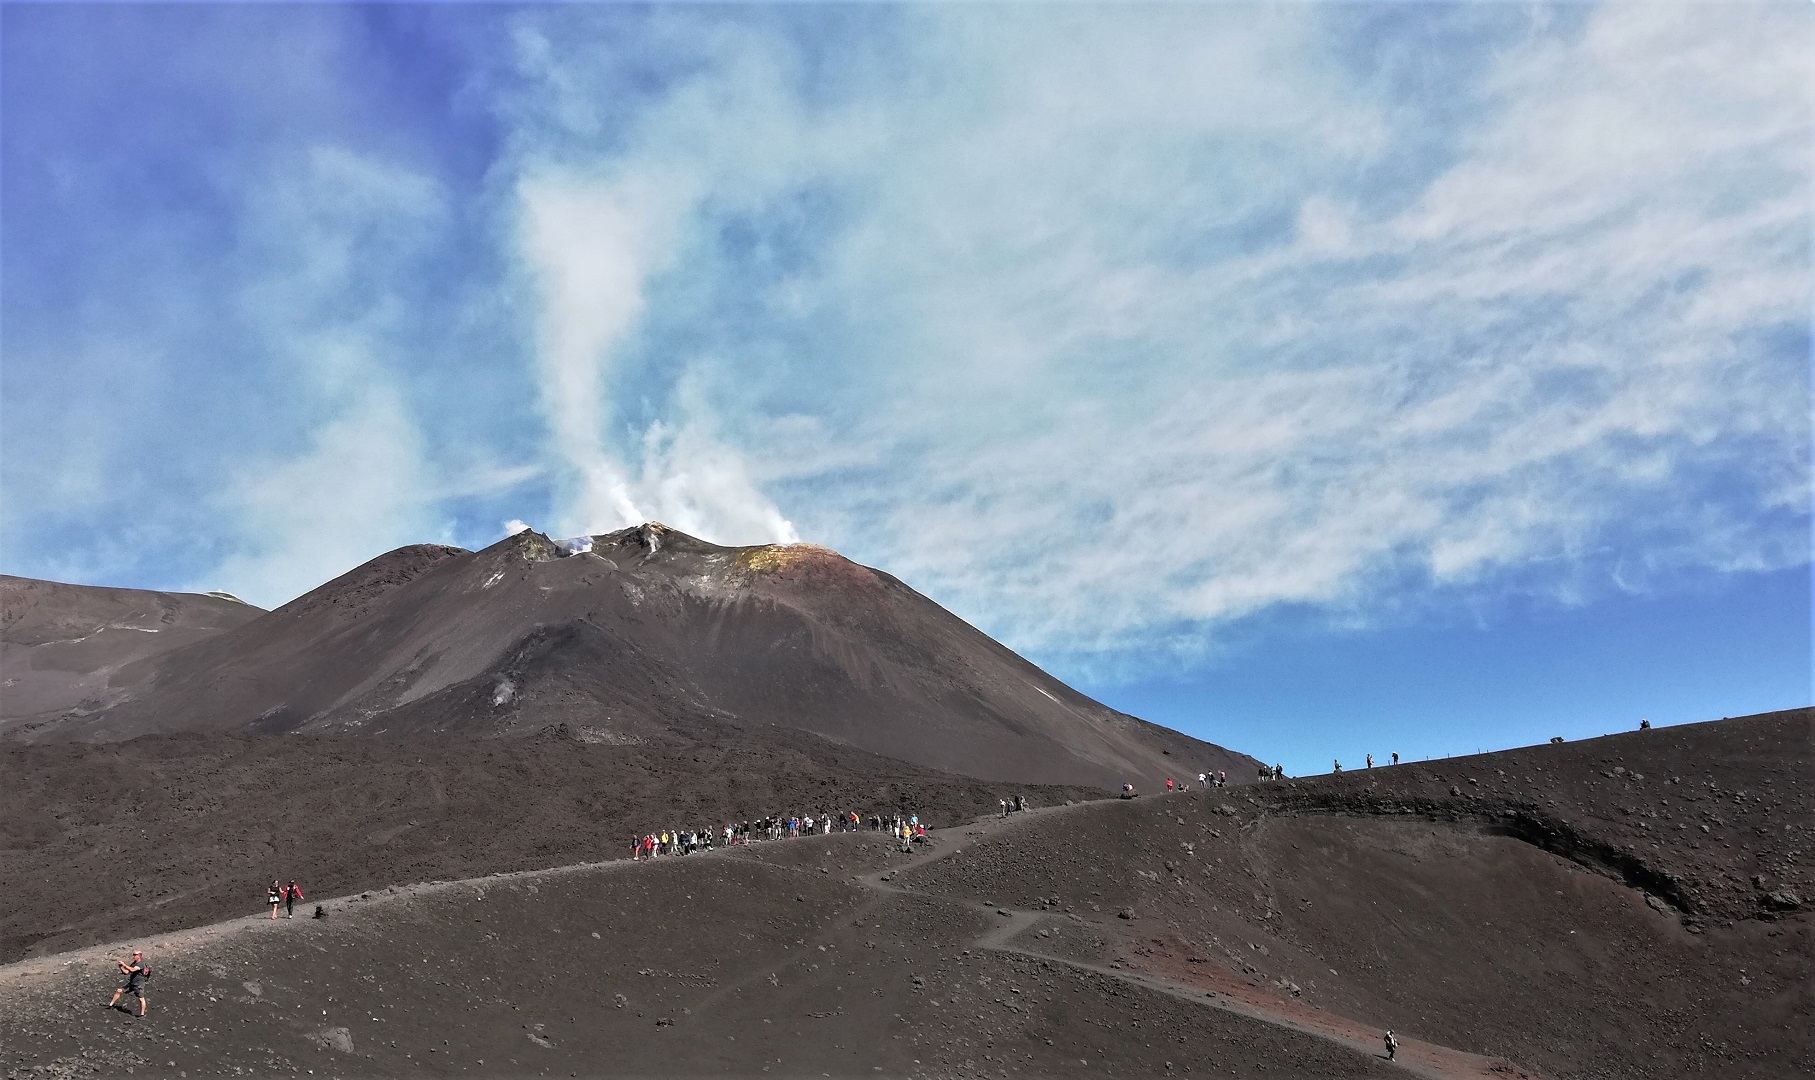 Mount Etna experience by skipping the cable car Magnets On The Fridge